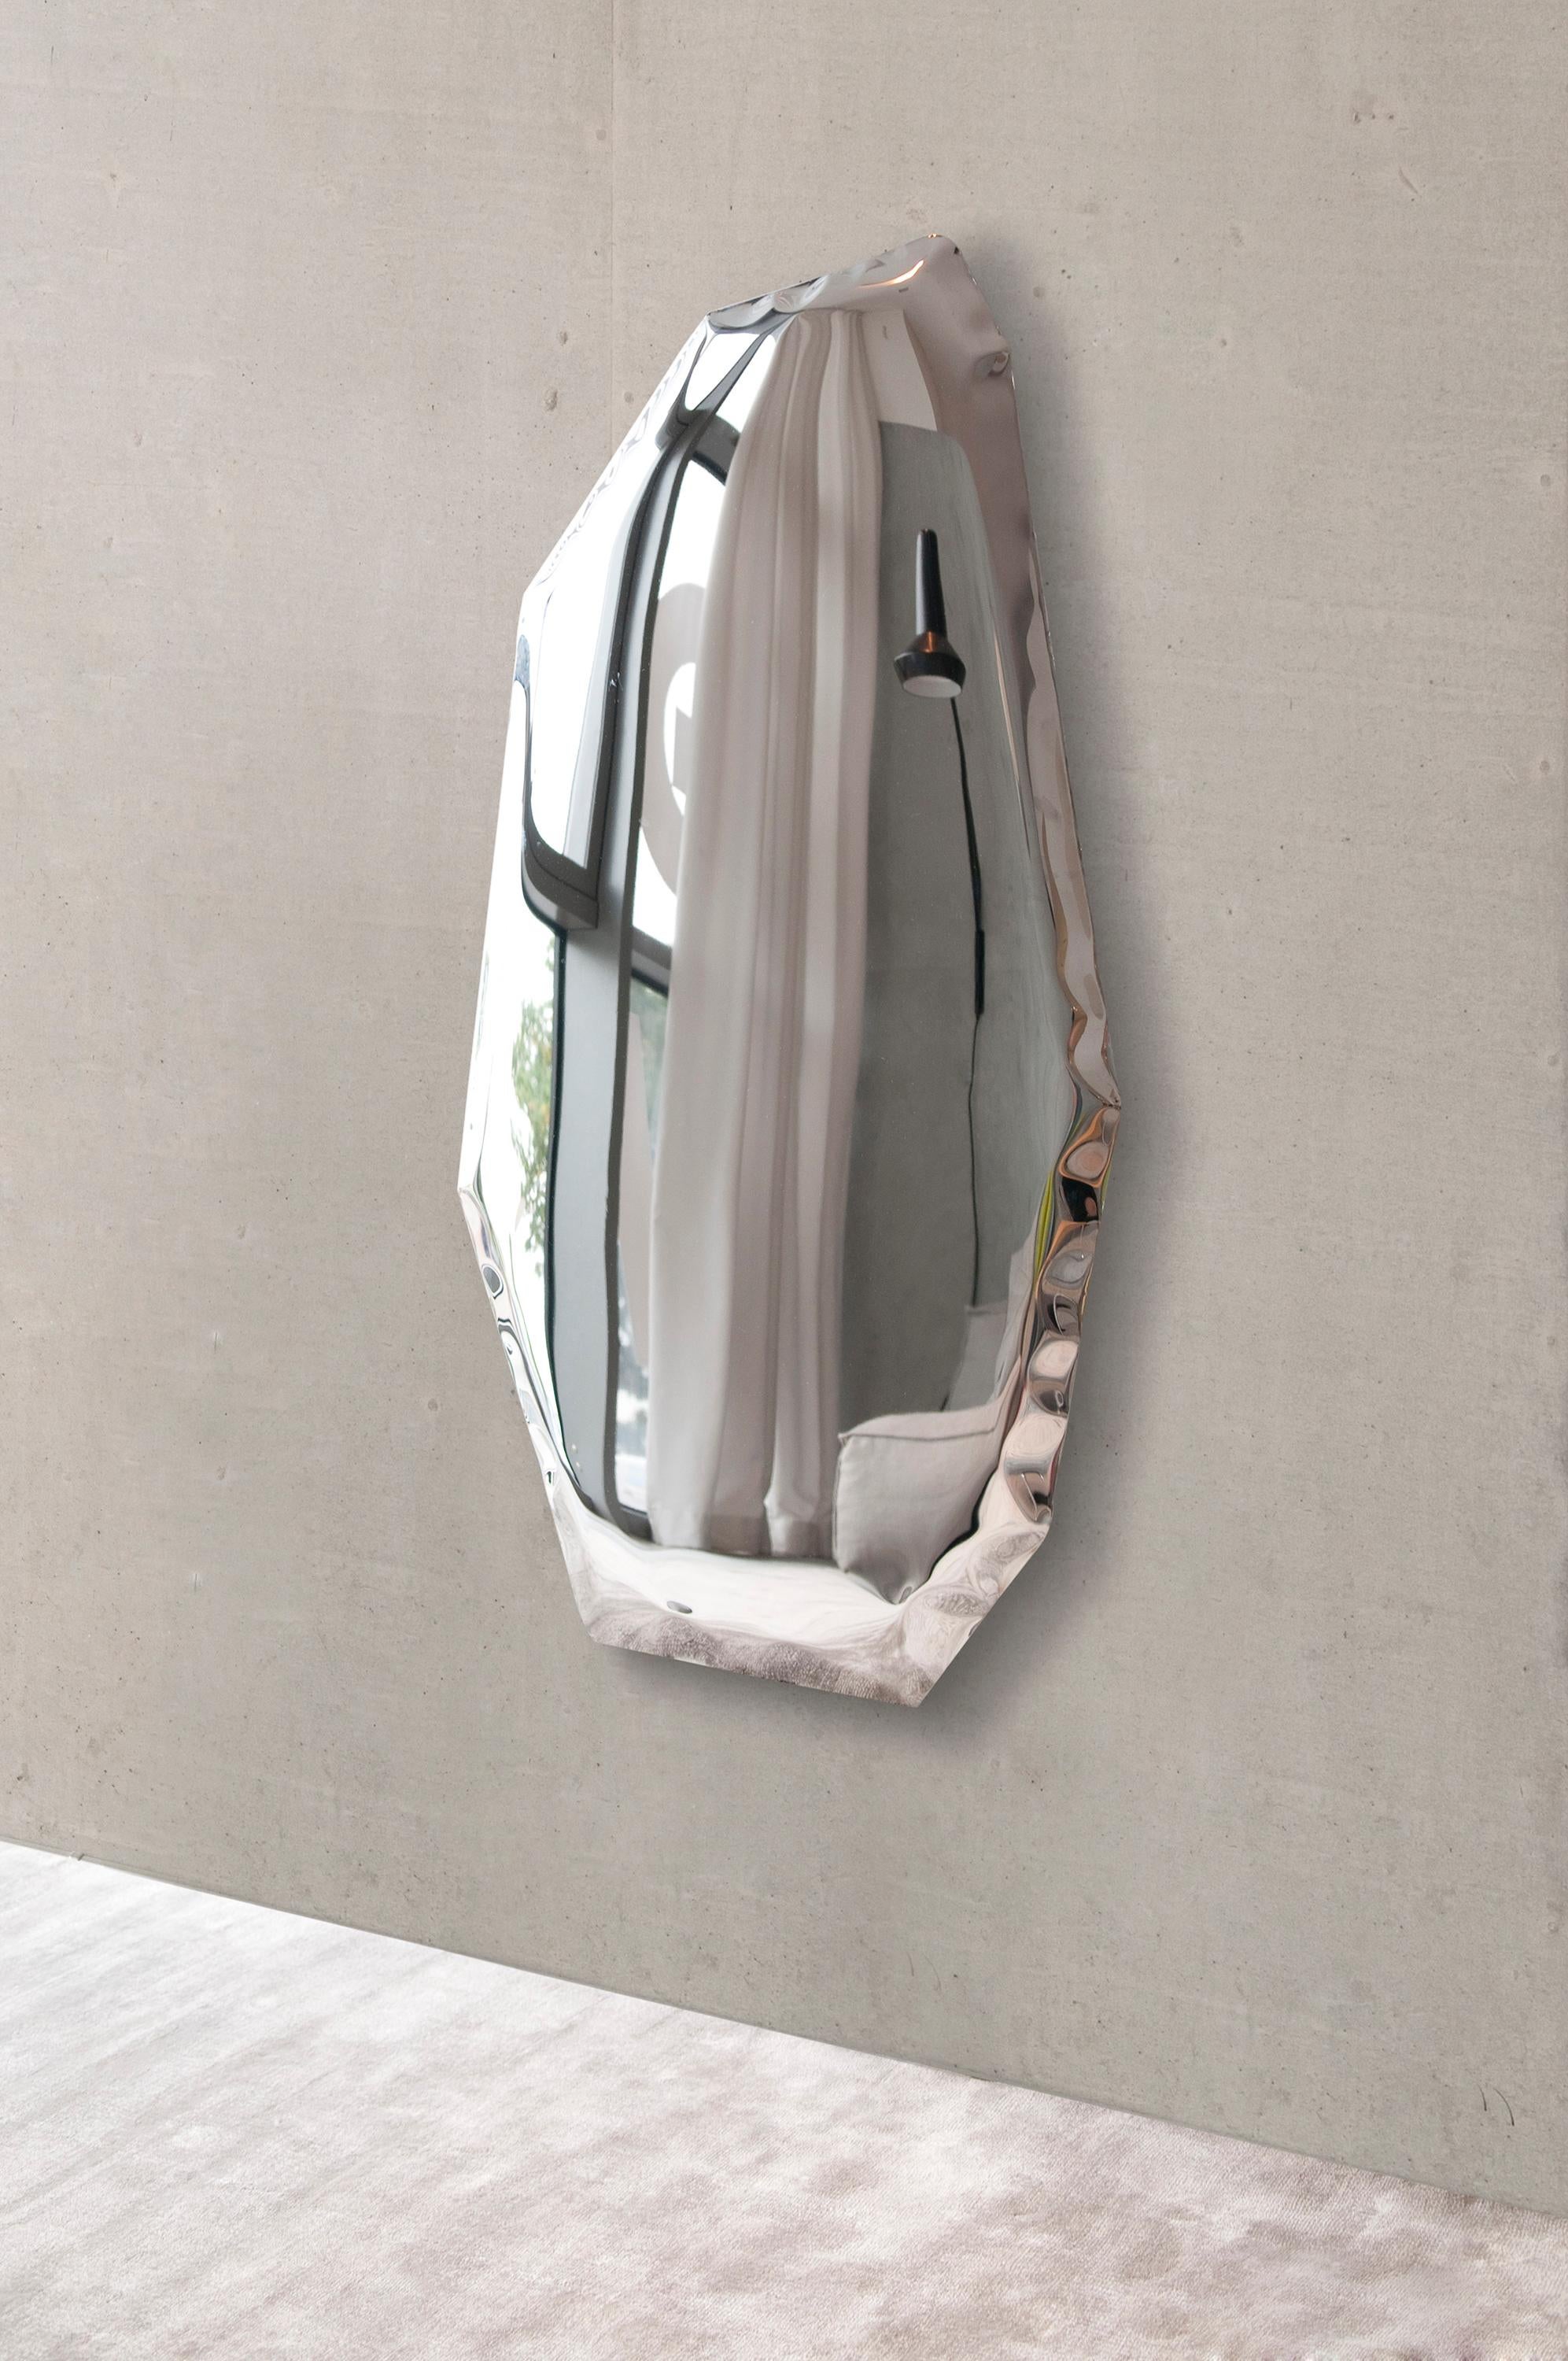 Stainless Steel Tafla C5 Sculptural Wall Mirror by Zieta For Sale 1